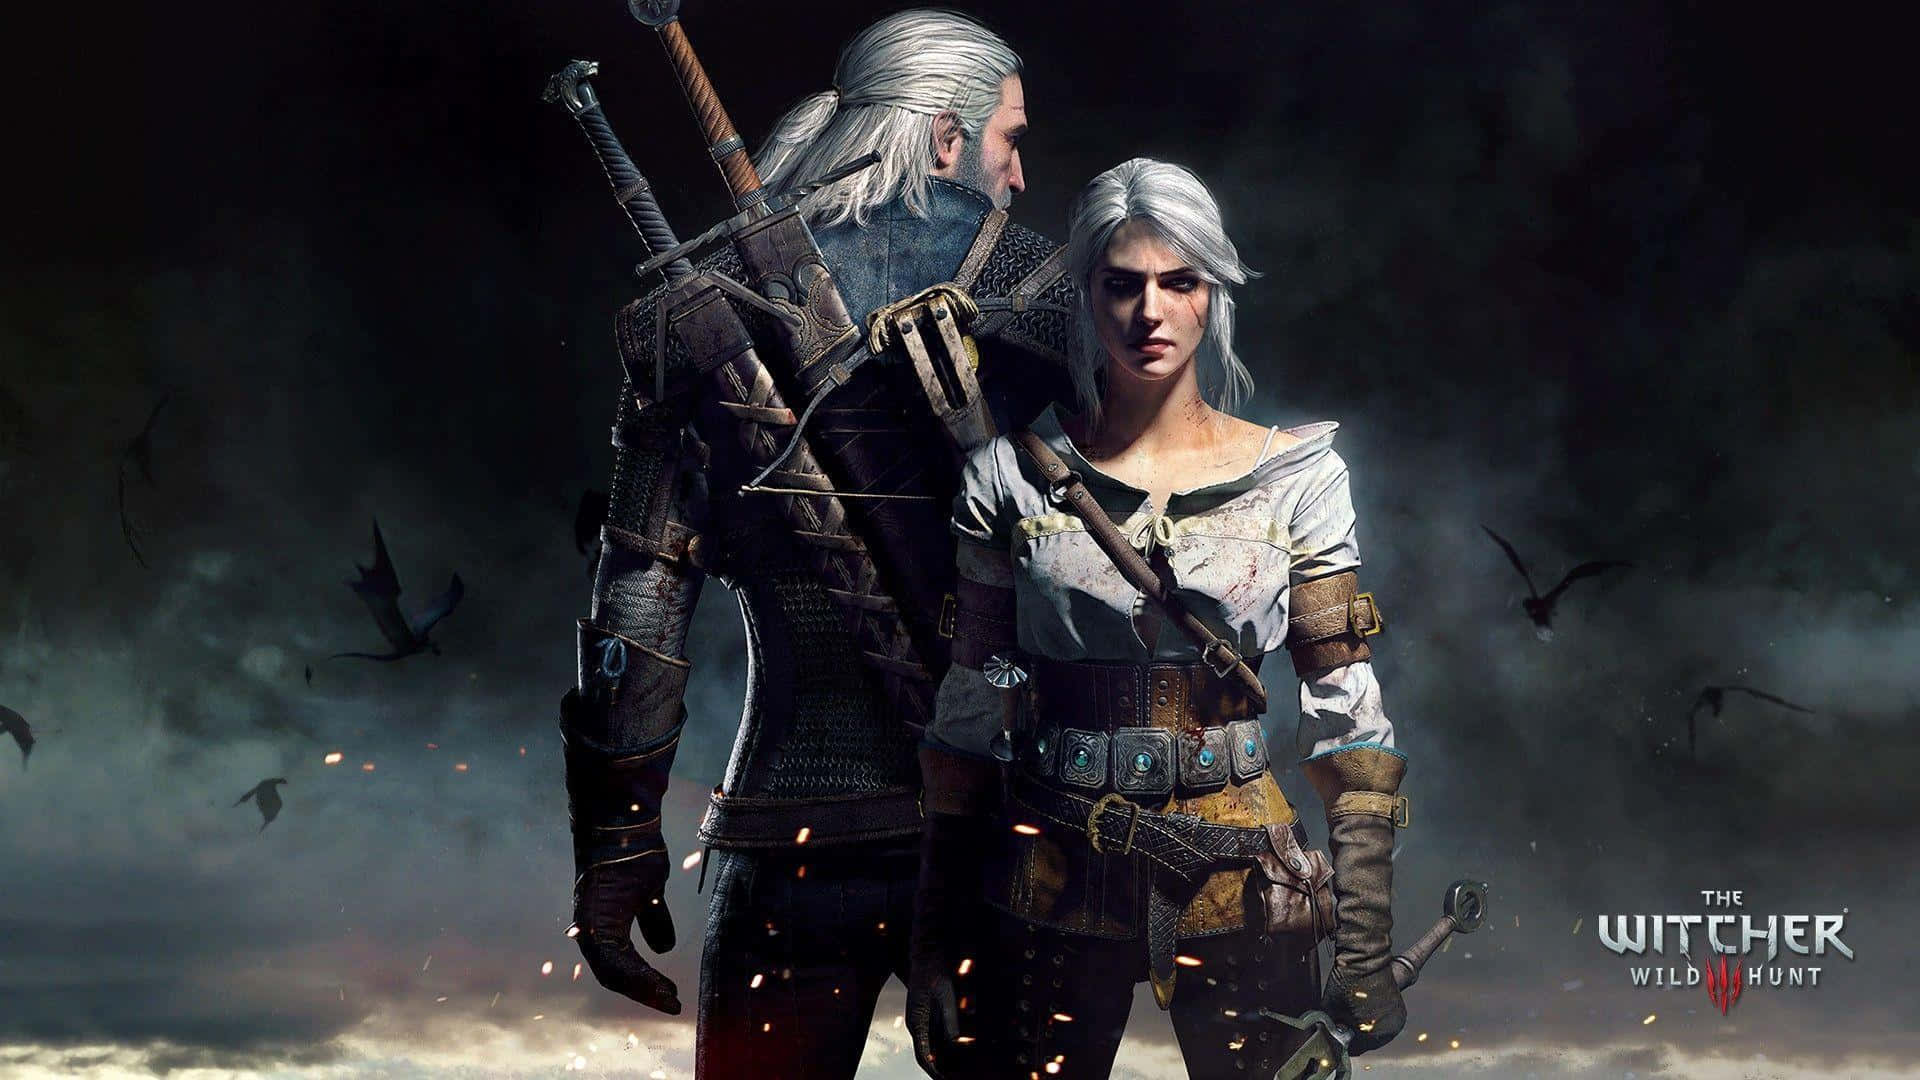 Experience the Wild Hunt in Witcher 3